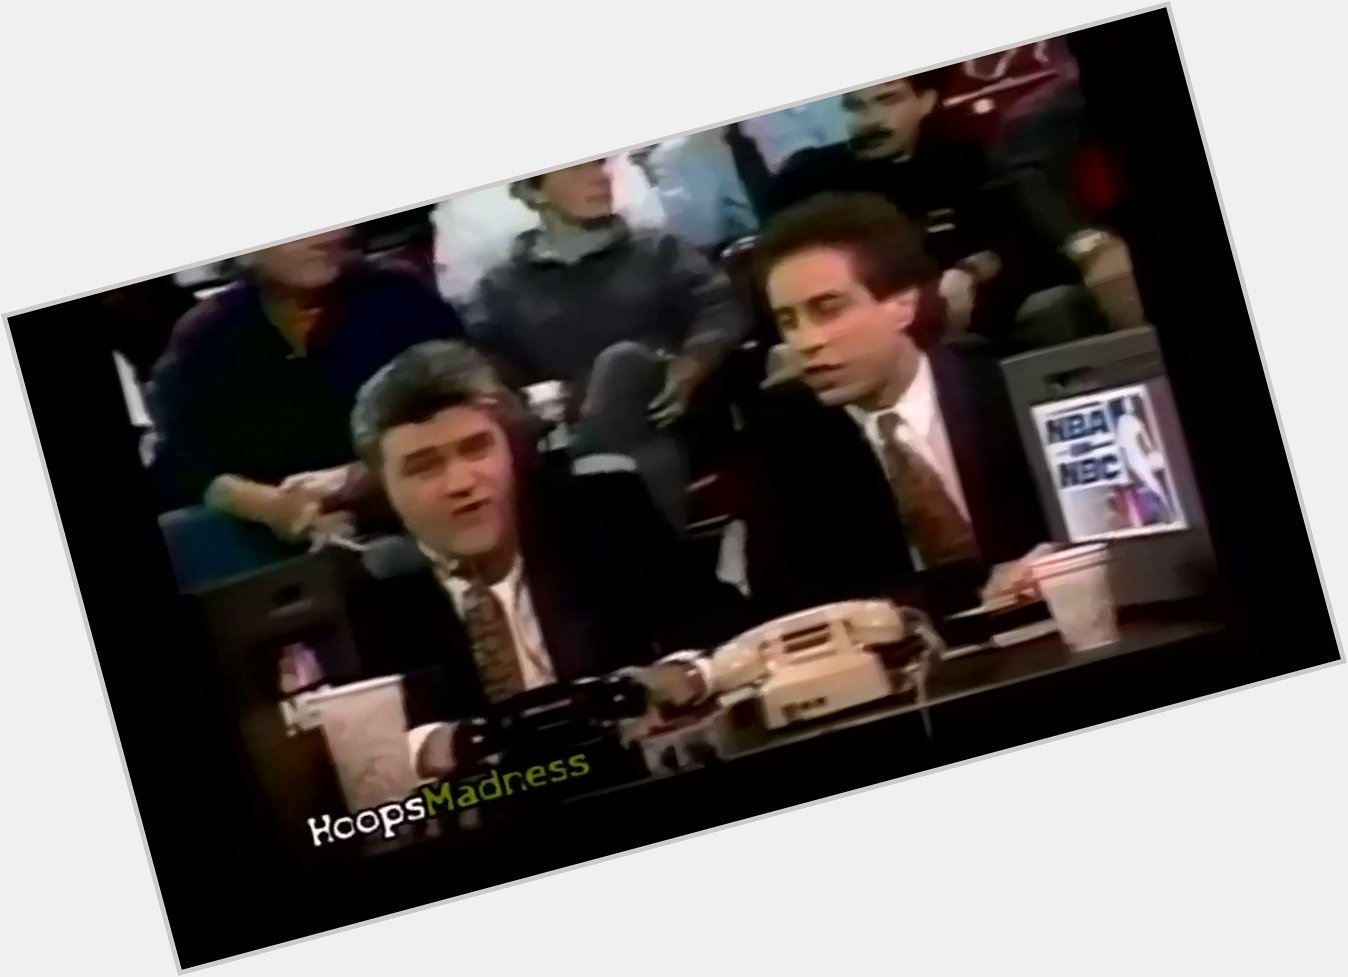 Jay Leno and Jerry Seinfeld as announcers What a duo!
Happy Birthday Seinfeld!
